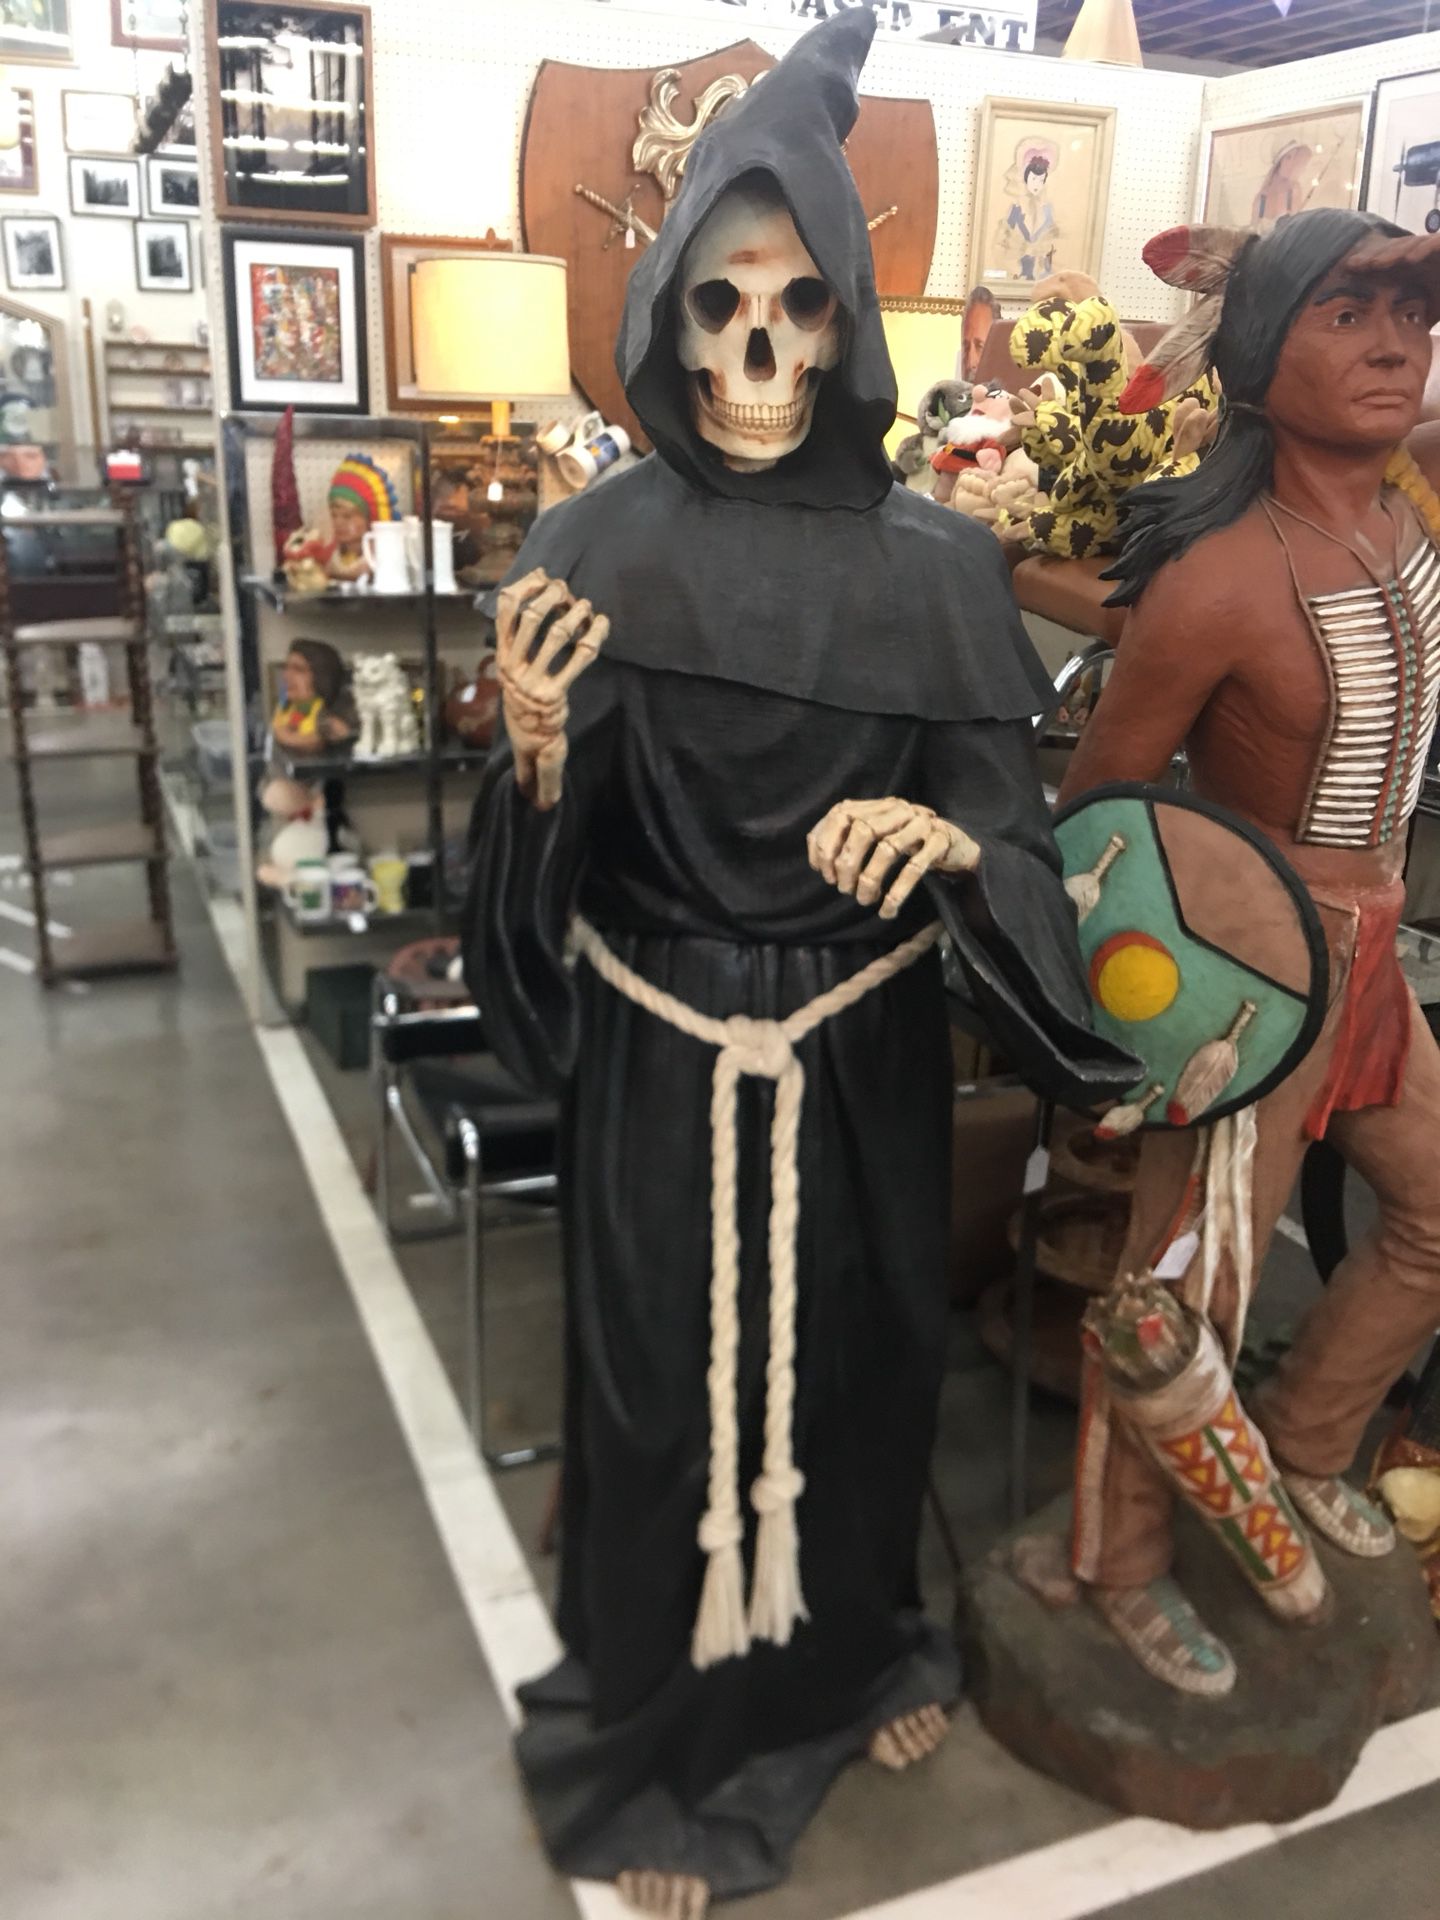 Halloween Decoration / Over 6 ft tall Grim Reaper Statue